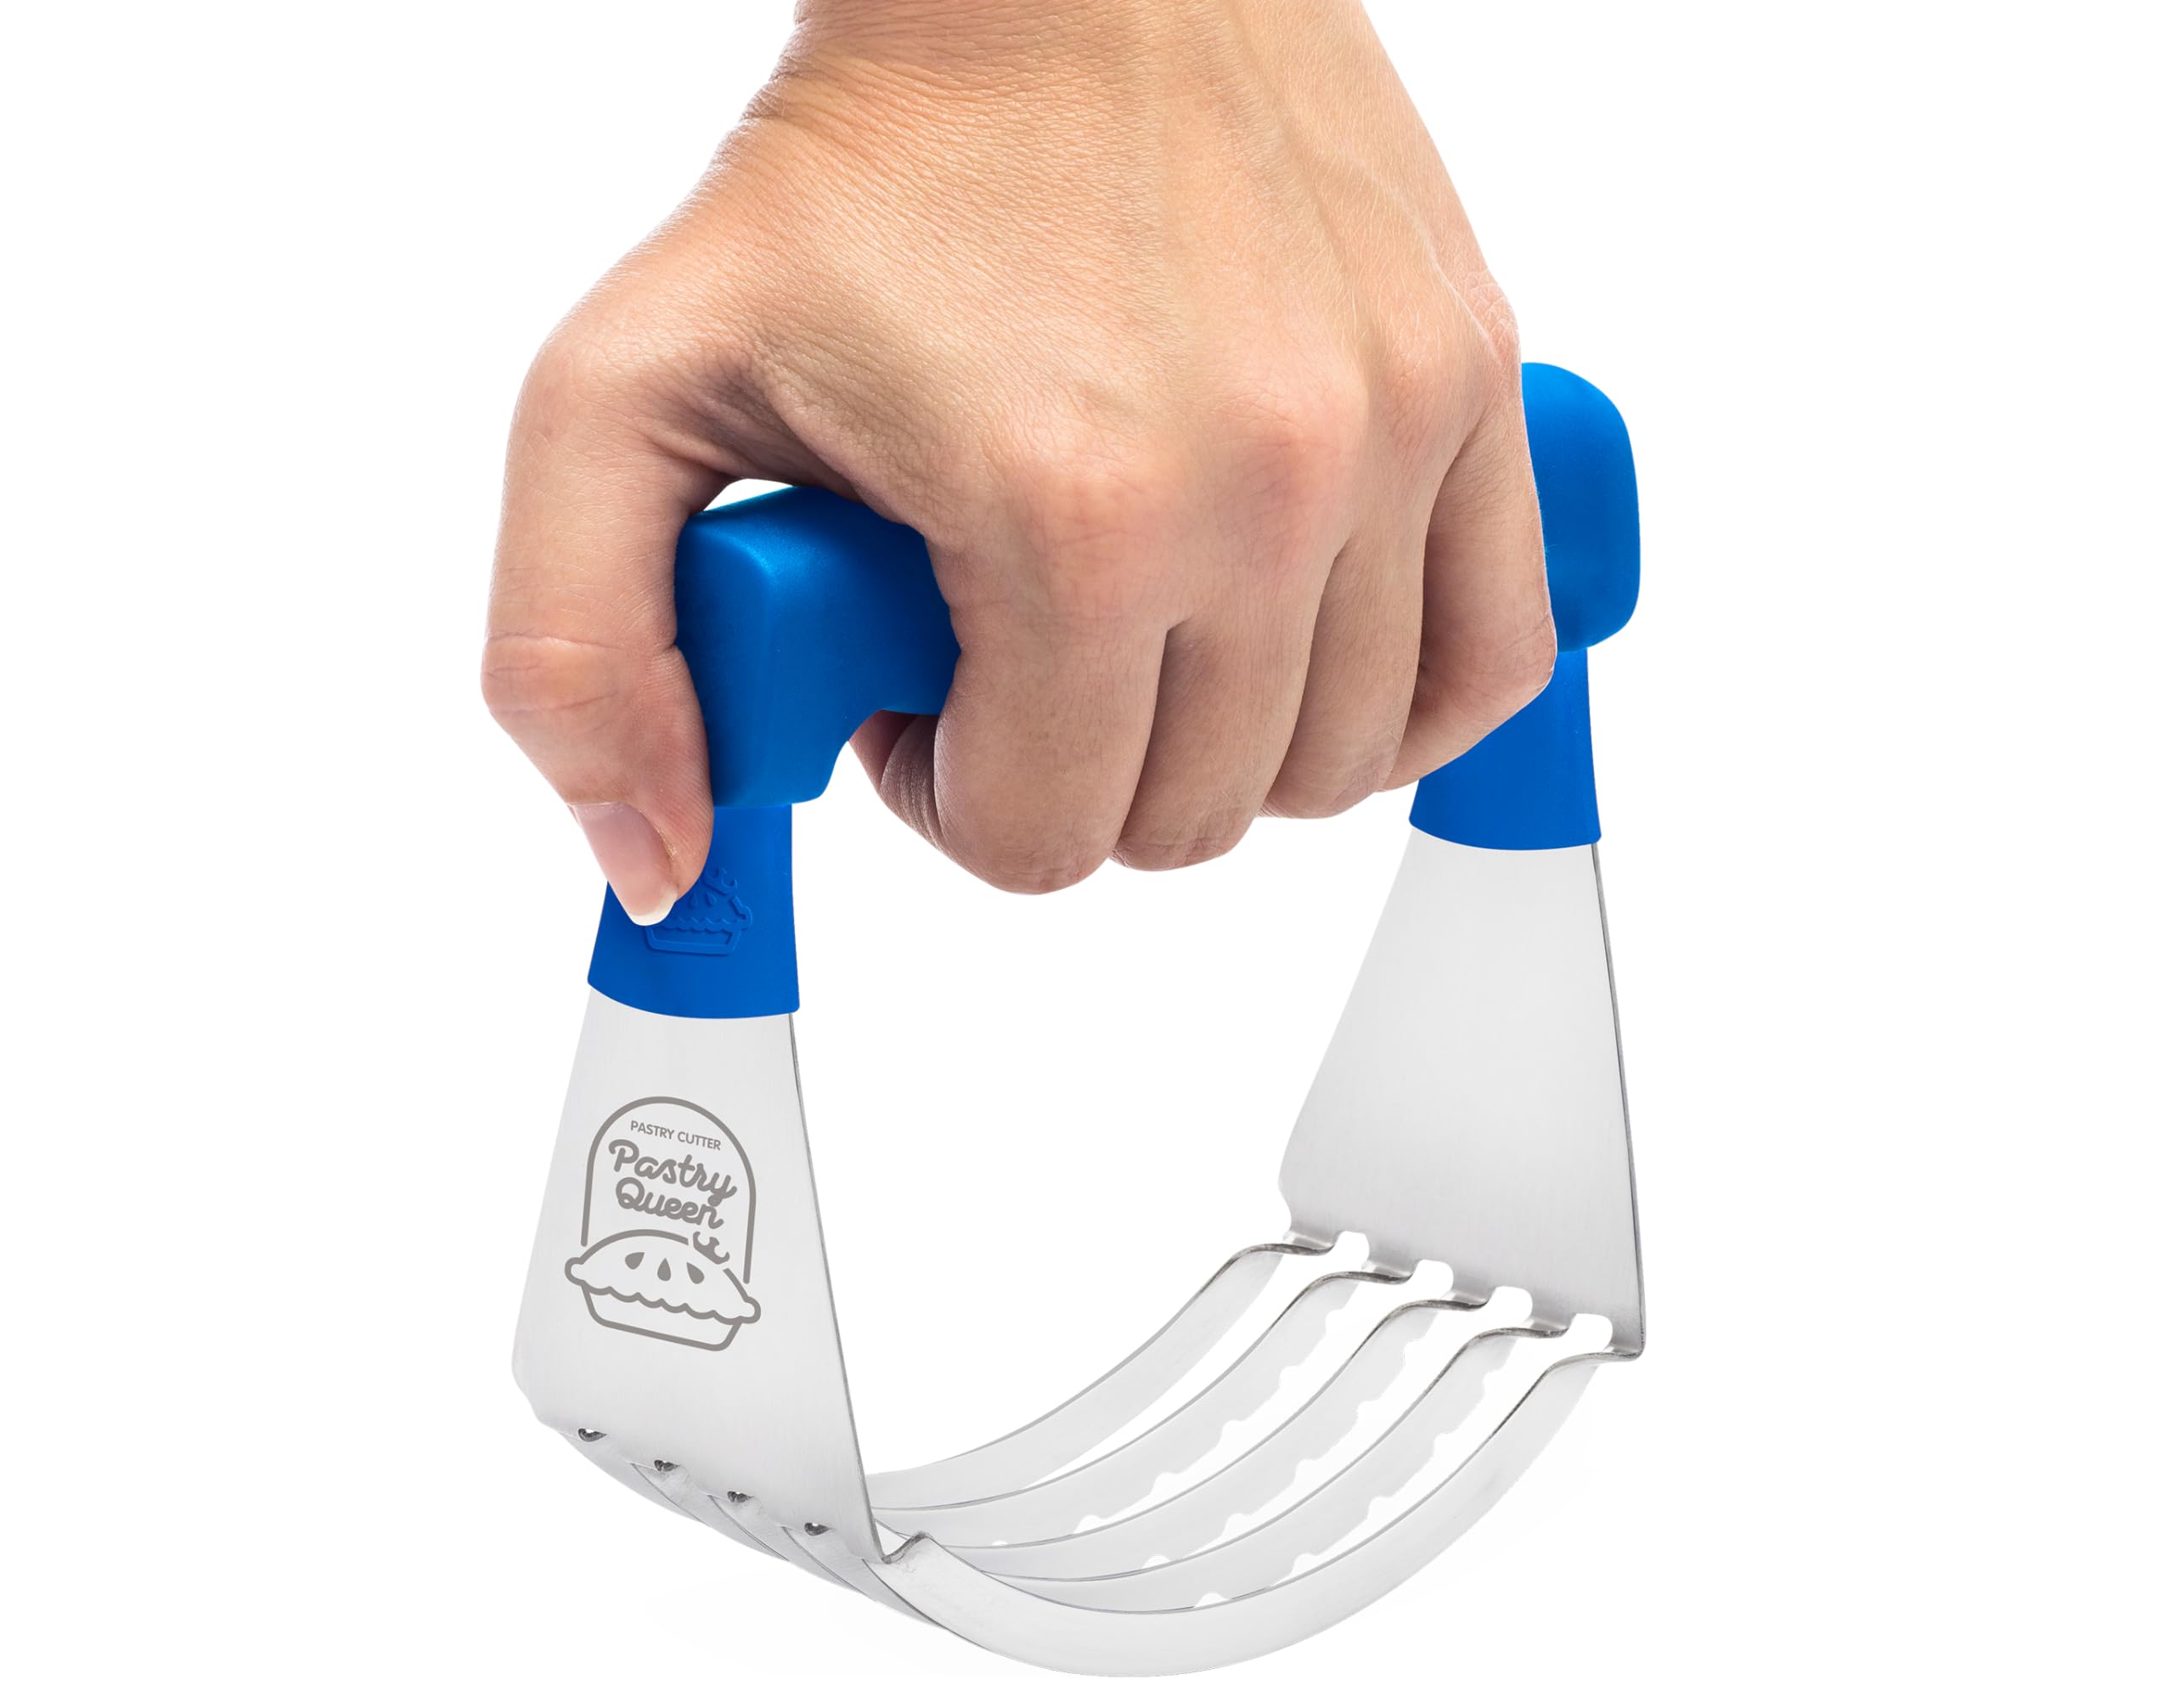 Pastry Cutter Tool - Heavy Duty Stainless Steel Pastry Dough Blender for Baking, Comfortable Handle, Dishwasher Safe, Create Perfectly Flaky Pie Crust, Biscuits & More - Blue